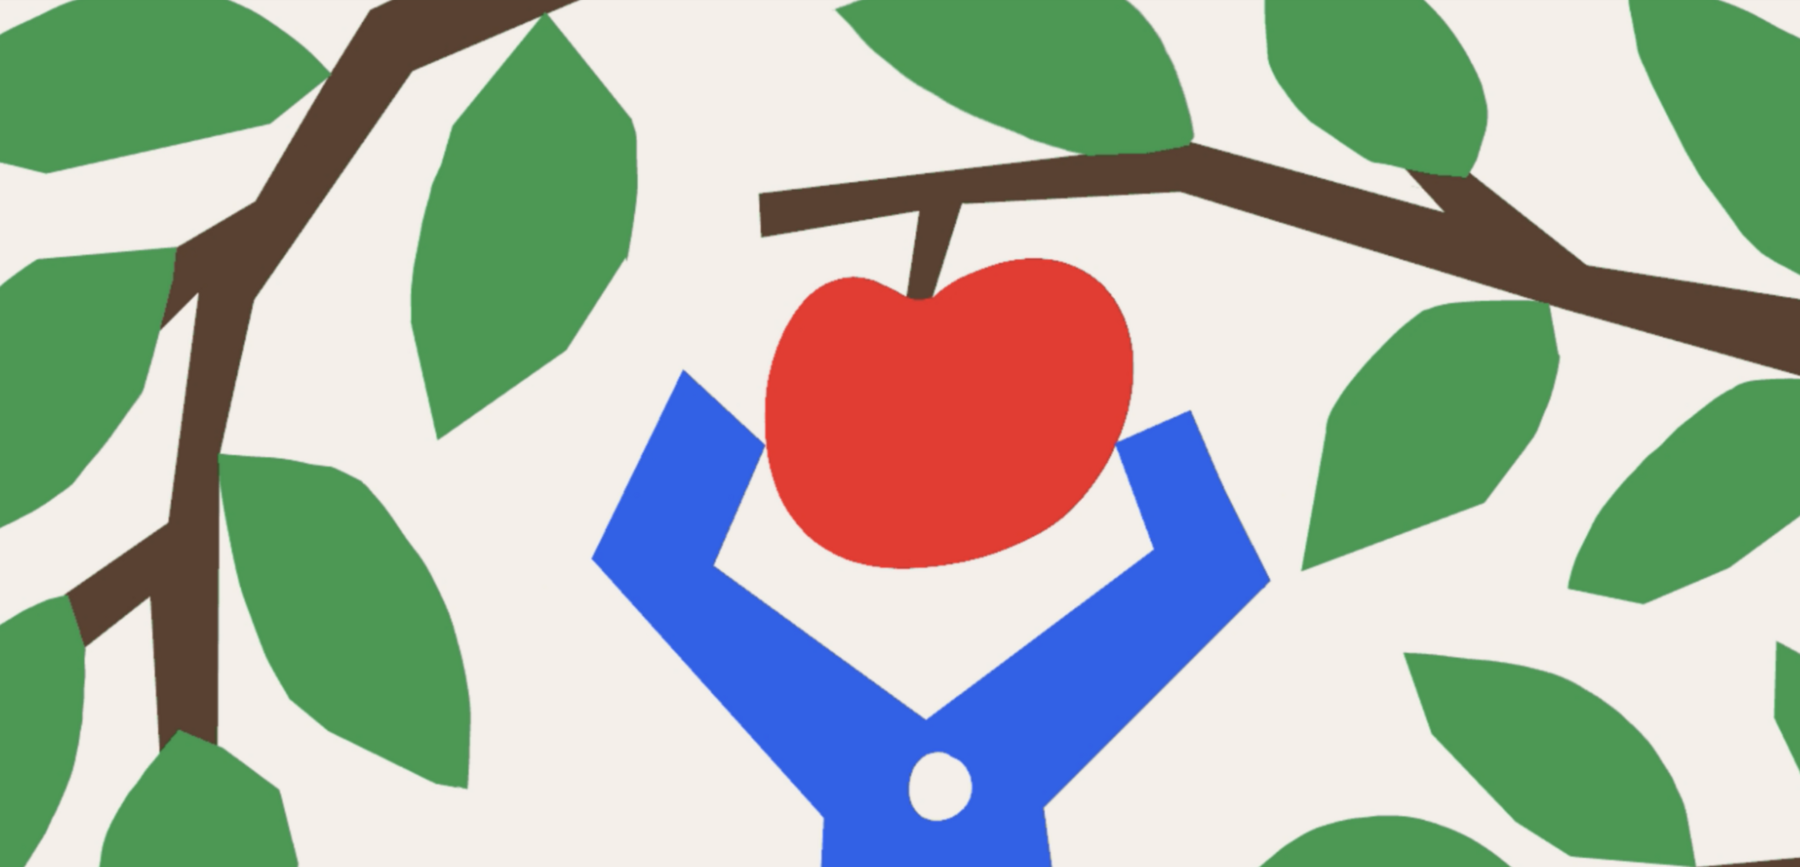 Blocky illustration of a blue robotic pincher plucking a red apple that is hanging from a tree branch.